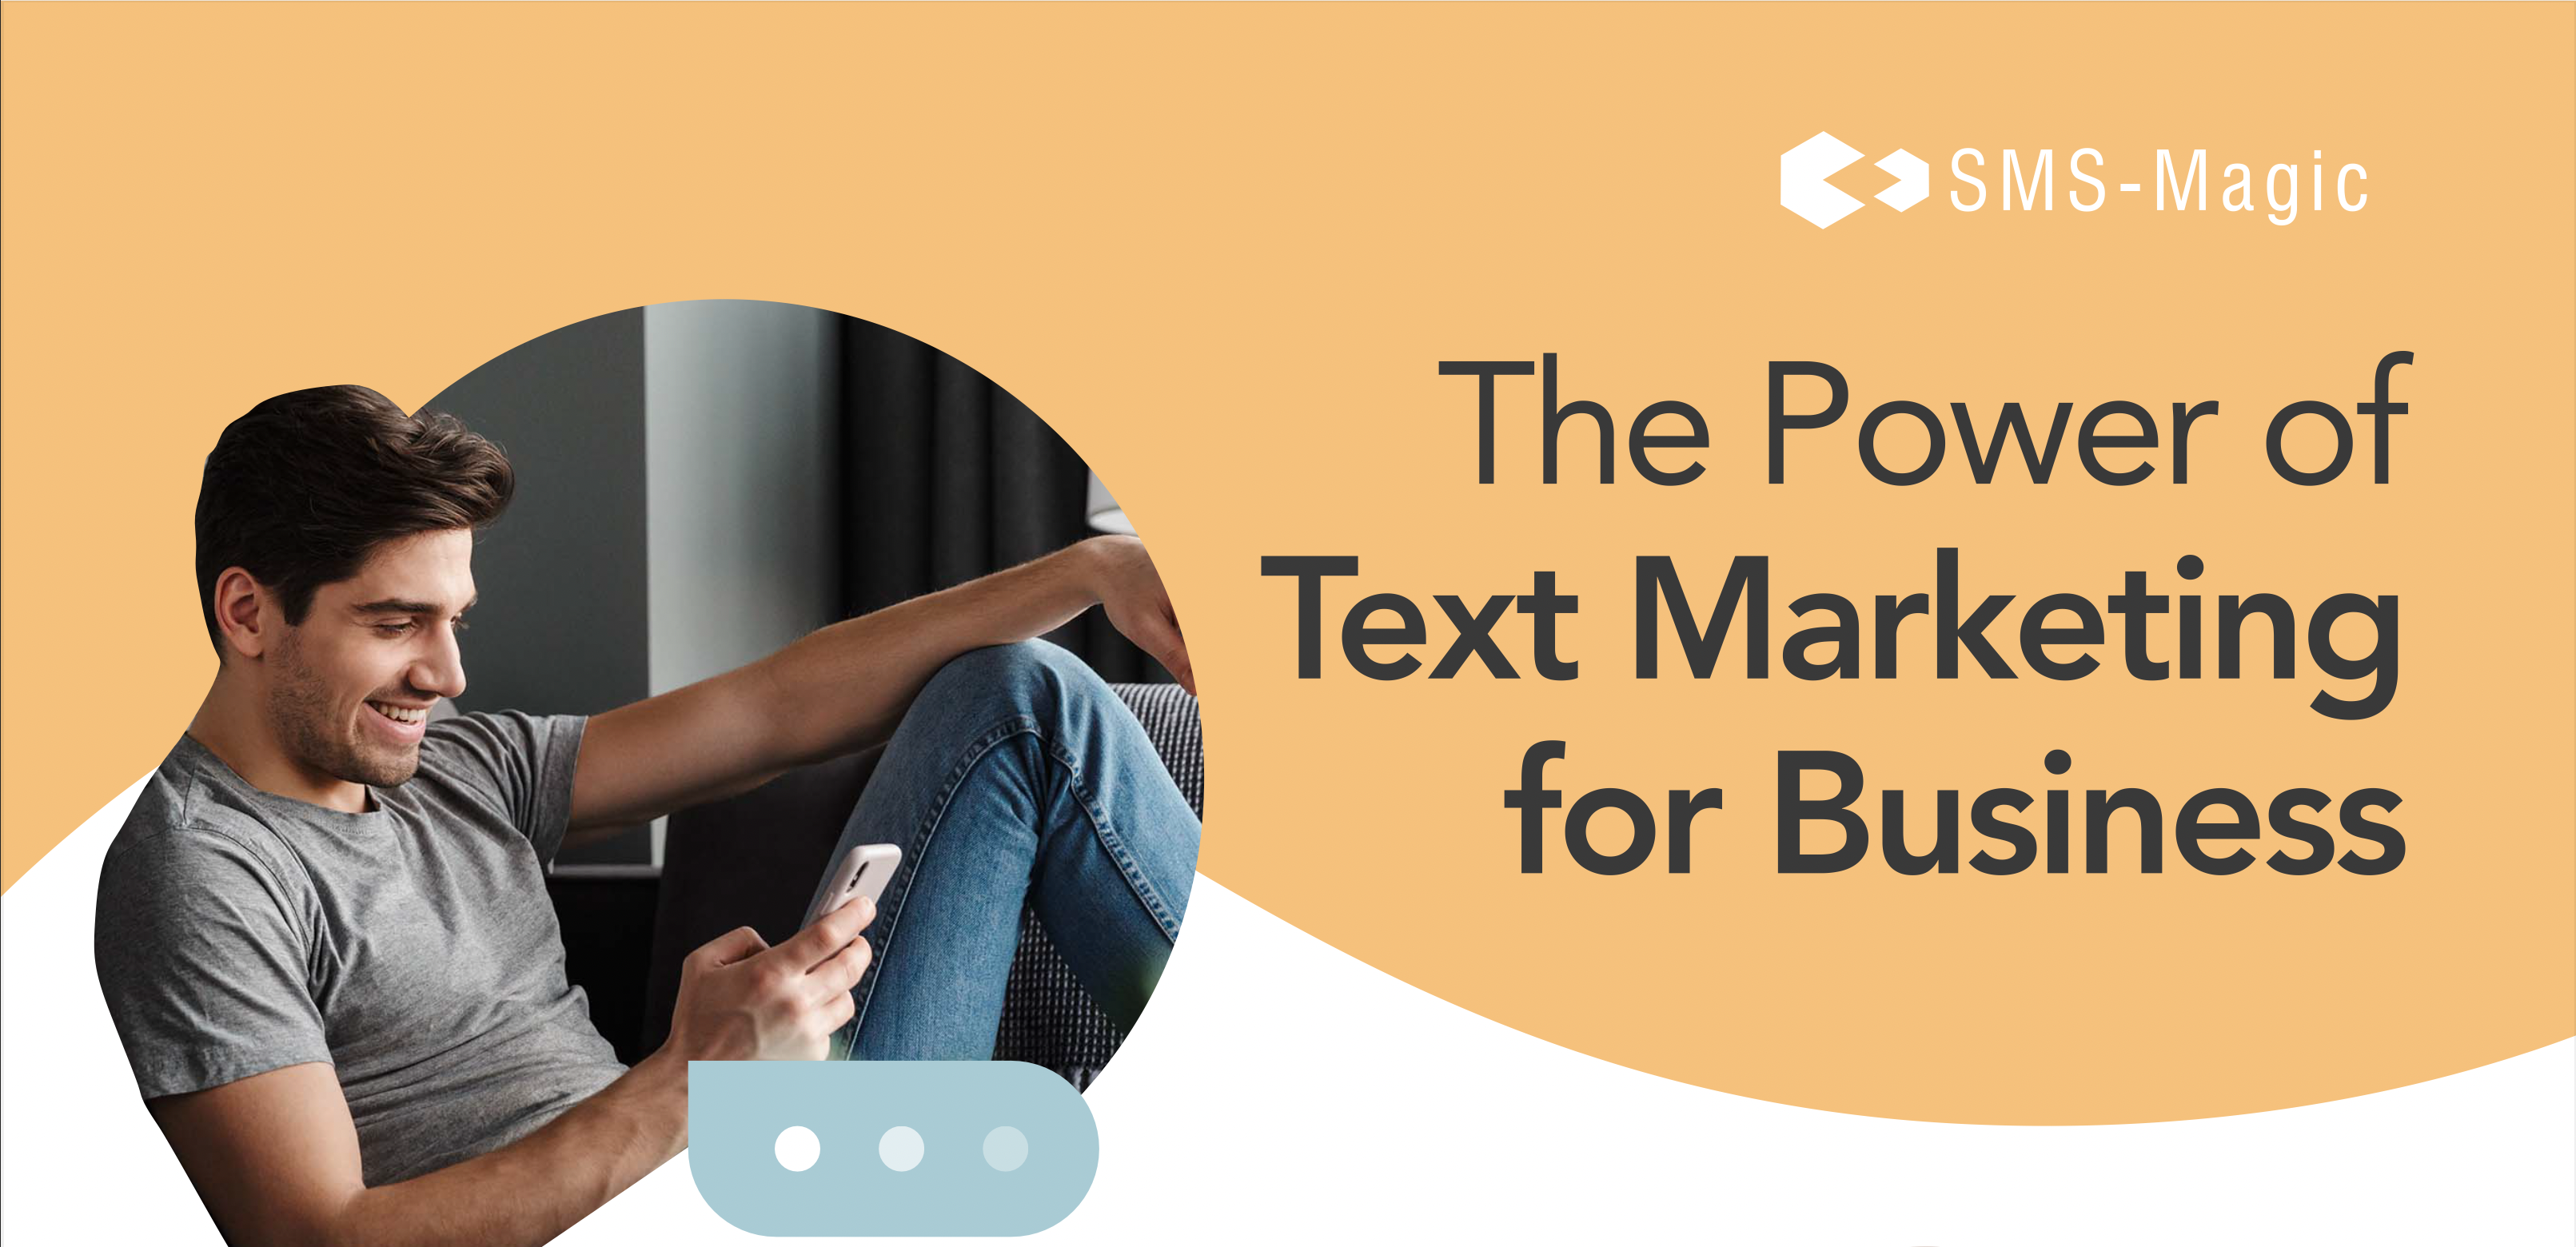 The power of text messaging for business